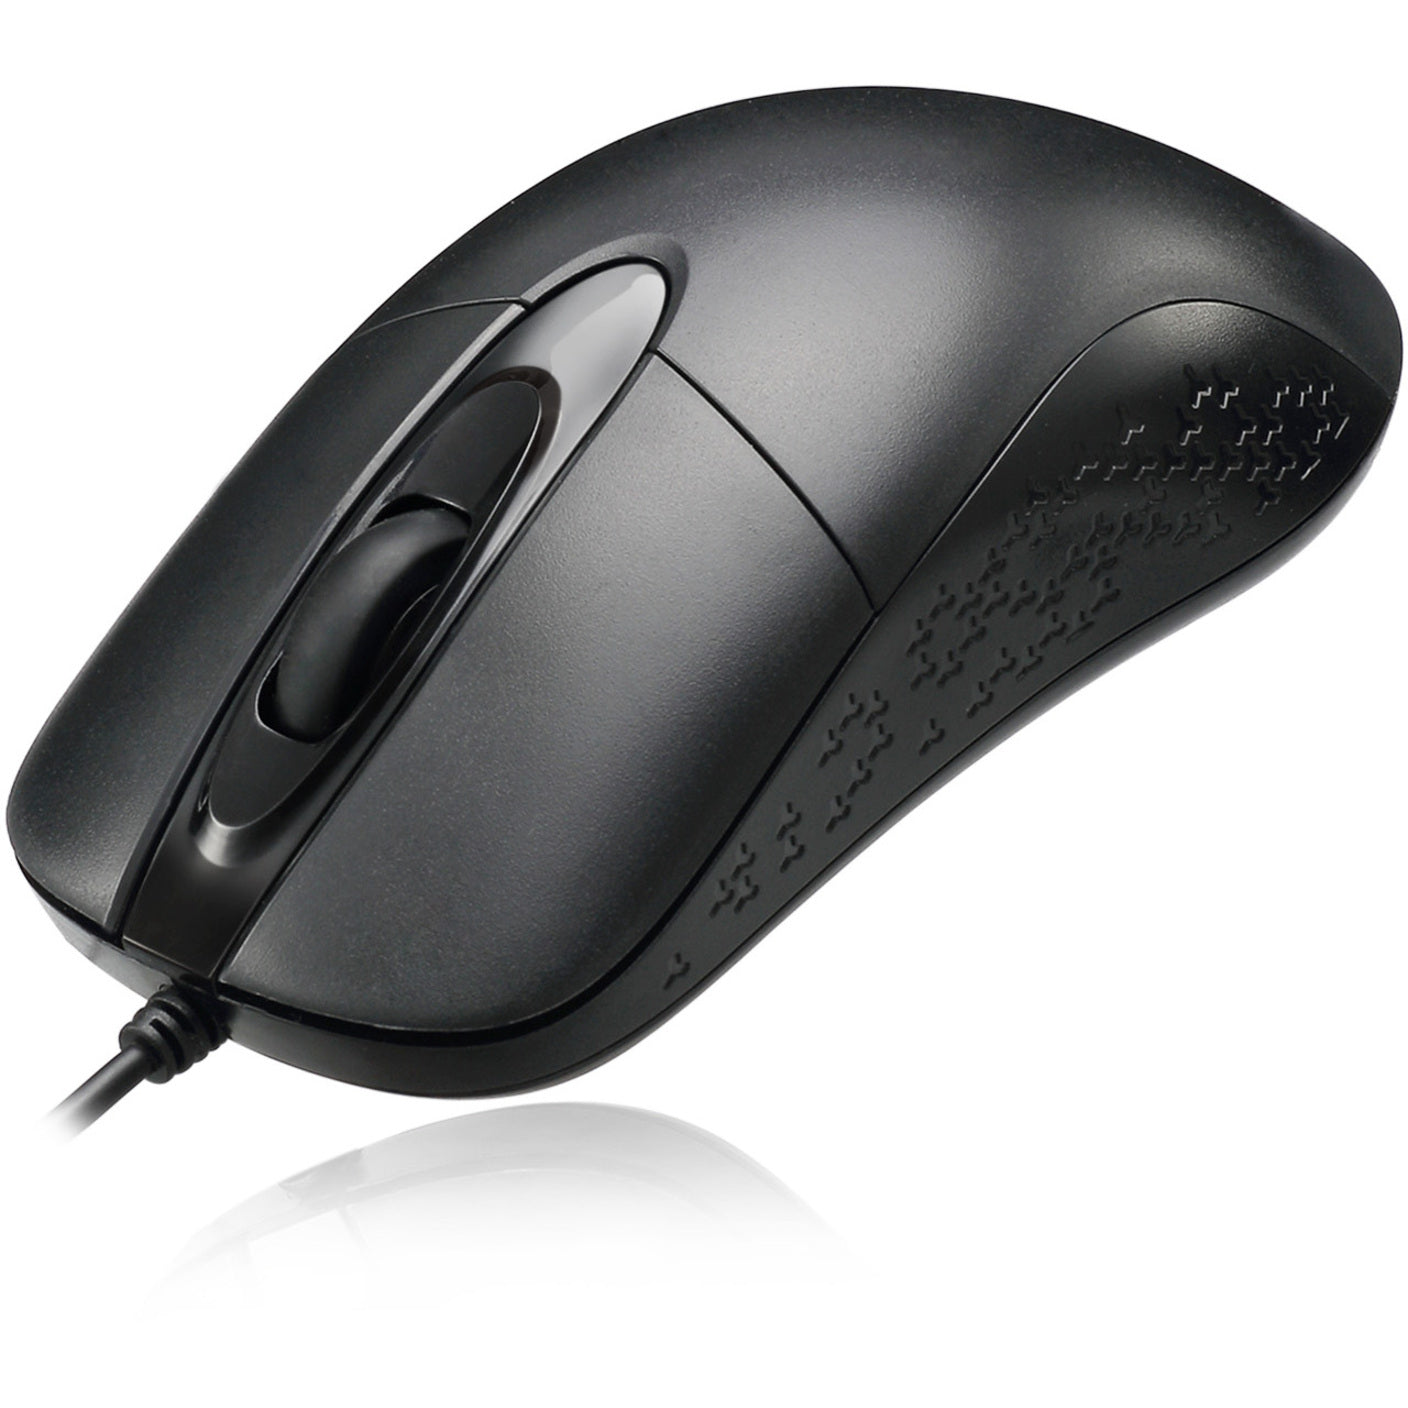 Adesso IMOUSE W4 Waterproof Antimicrobial Optical Mouse, Ergonomic Fit, Scroll Wheel, 1000 dpi